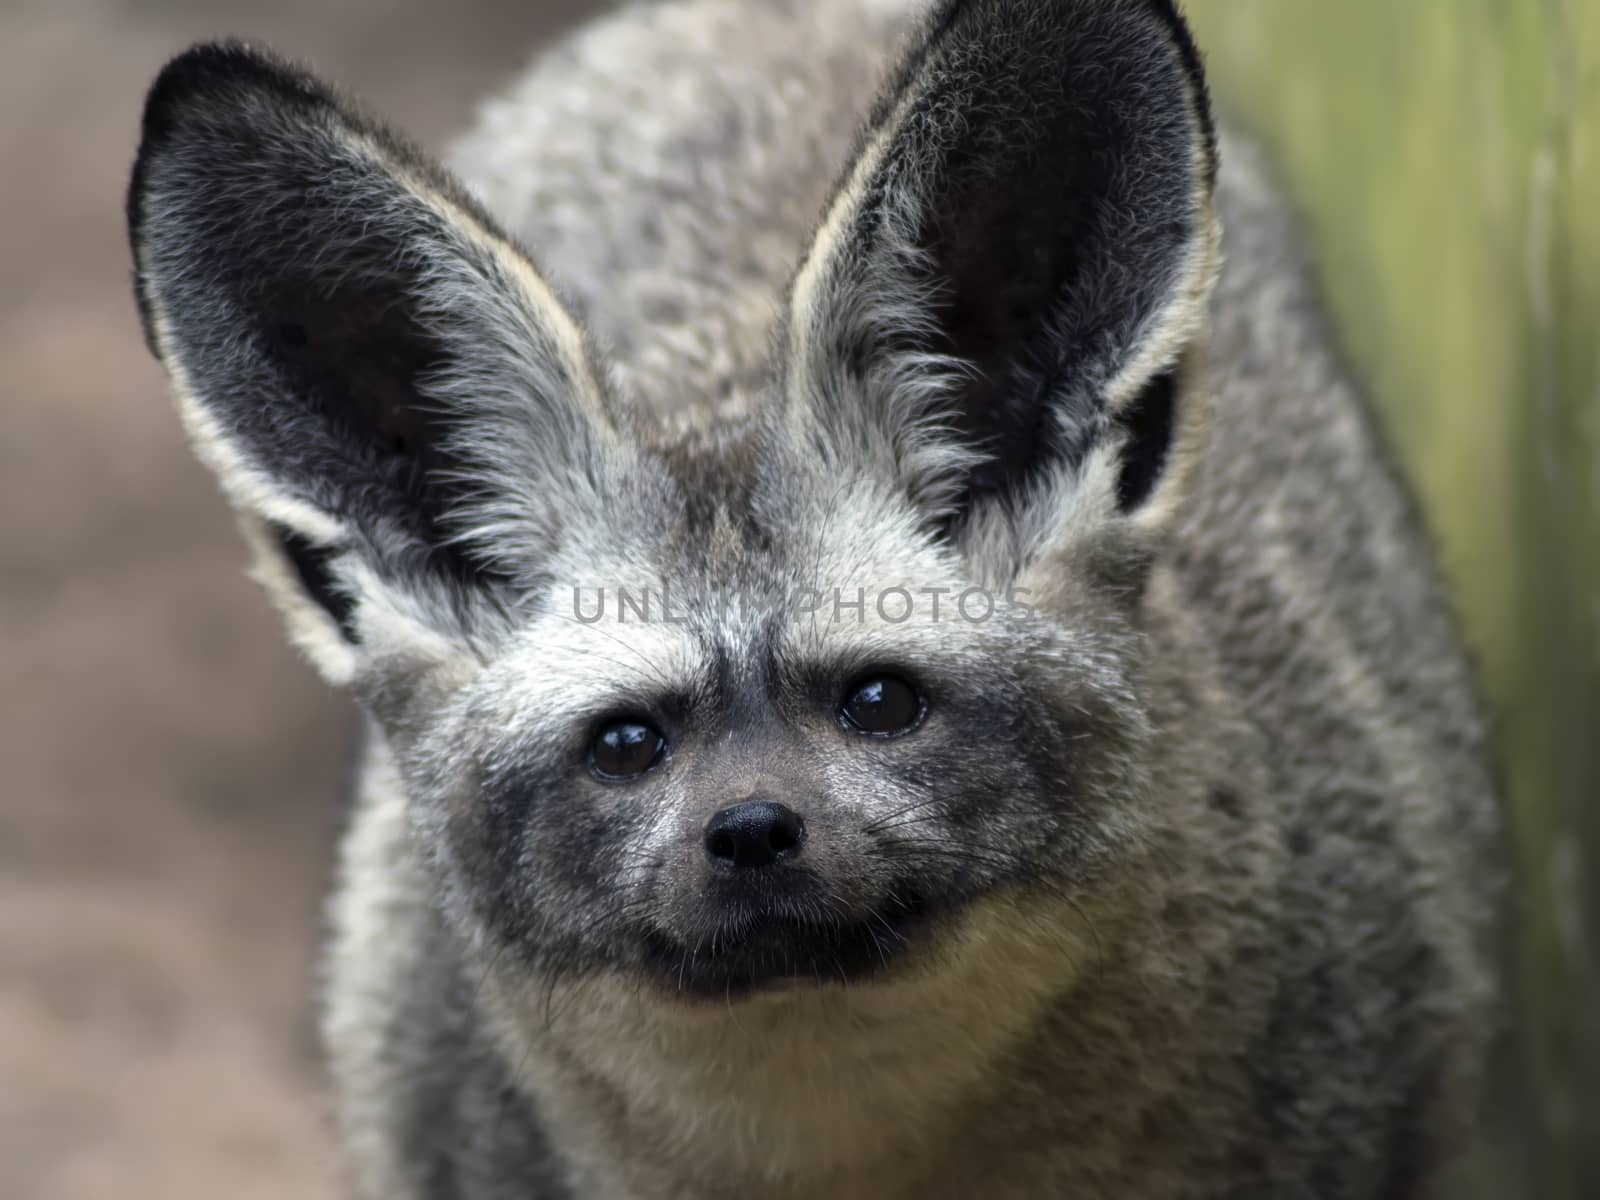 Bat-eared fox (Otocyon megalotis) is a canid of the African savanna, named for its large ears